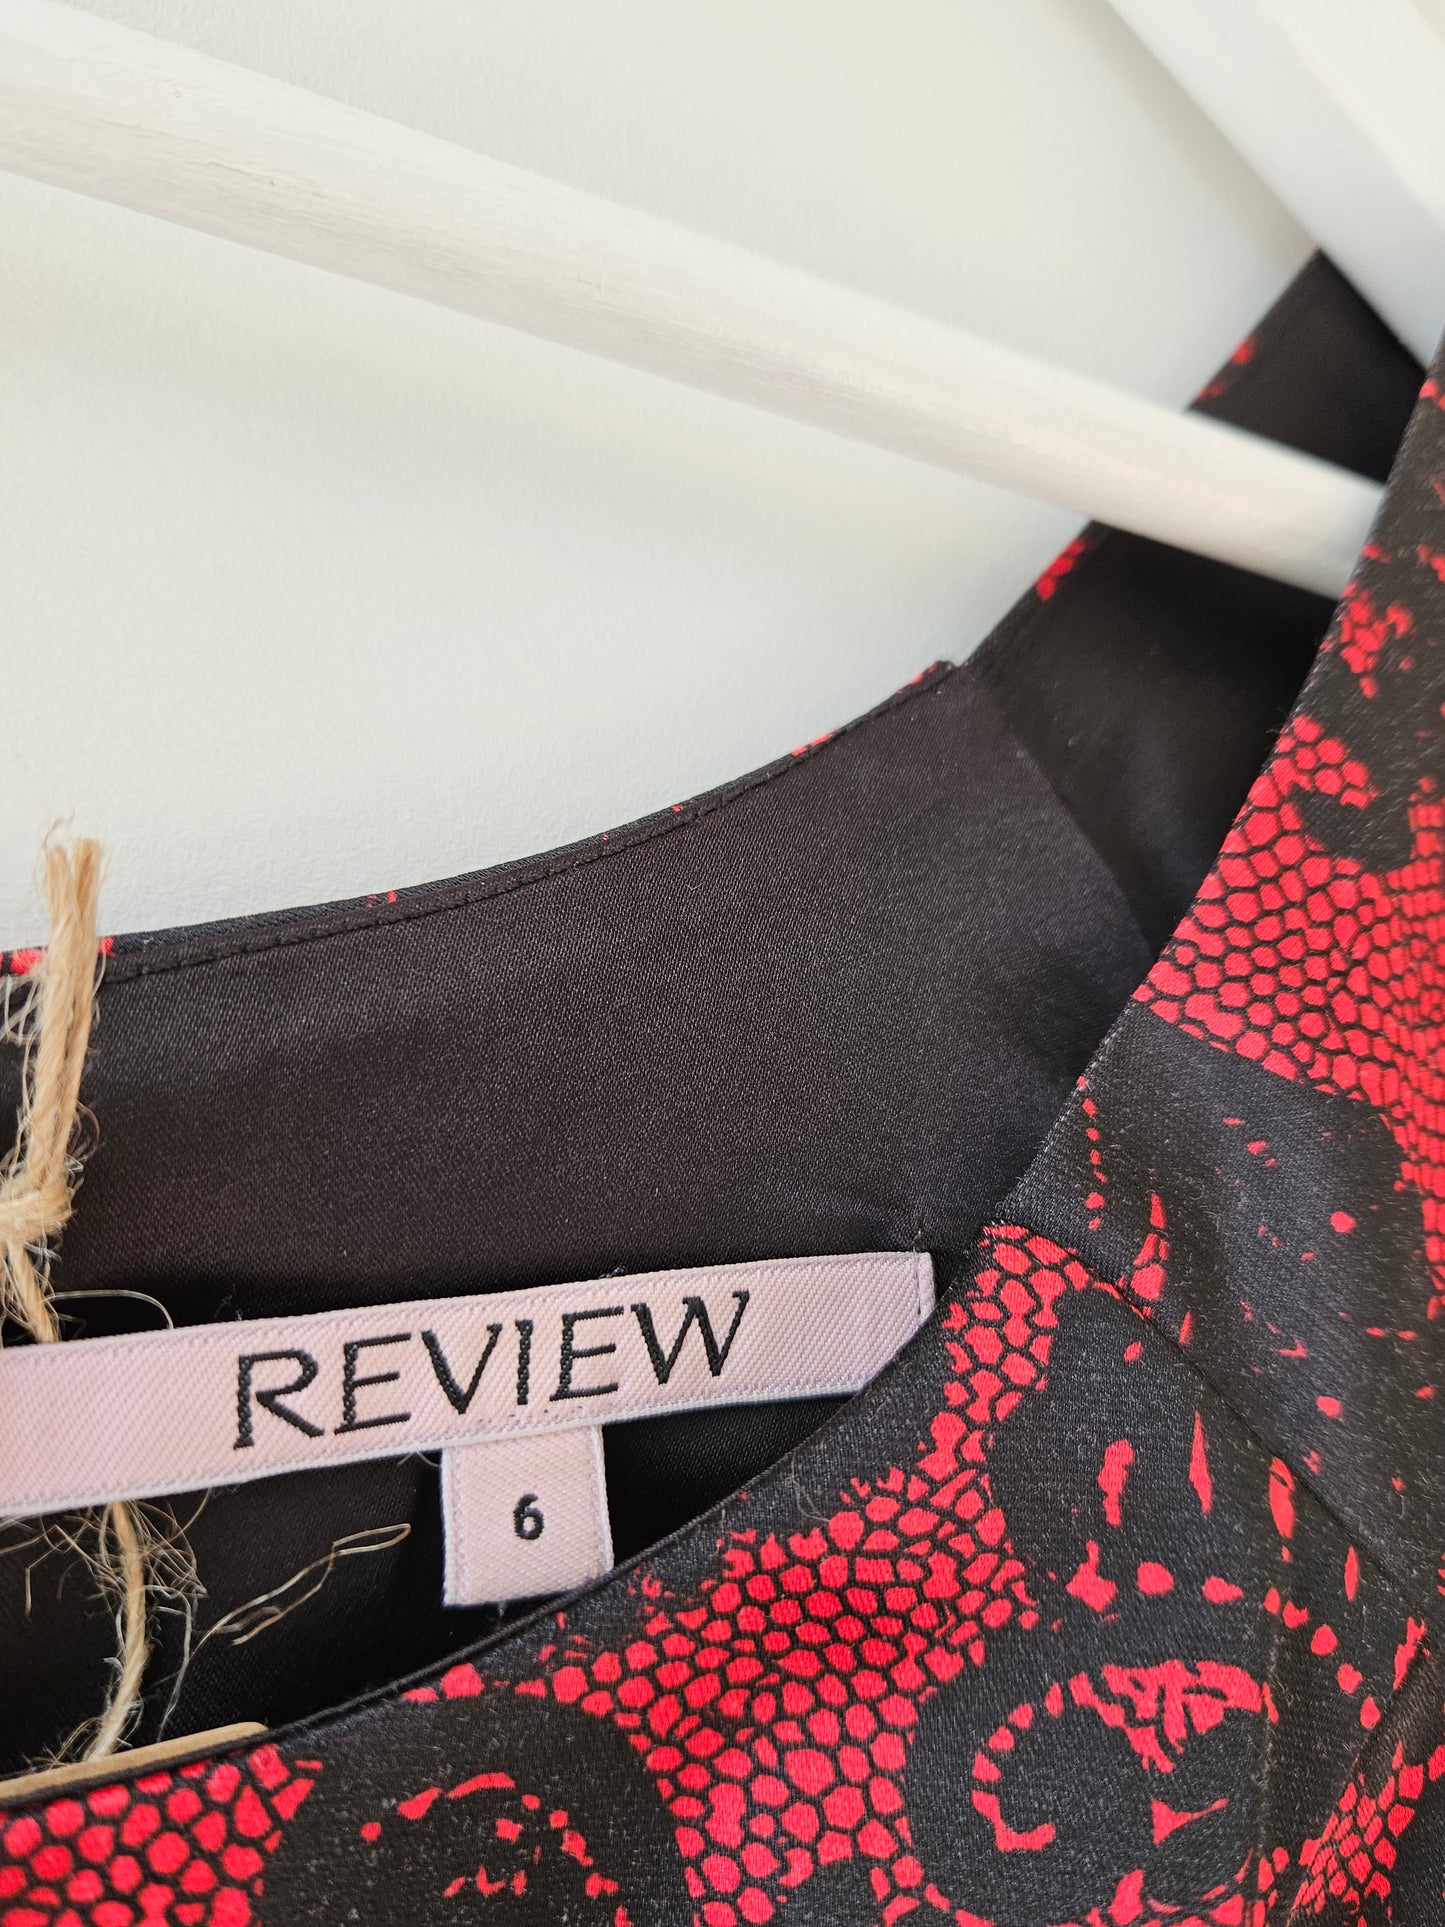 REVIEW Red and Black Lace Print Dress